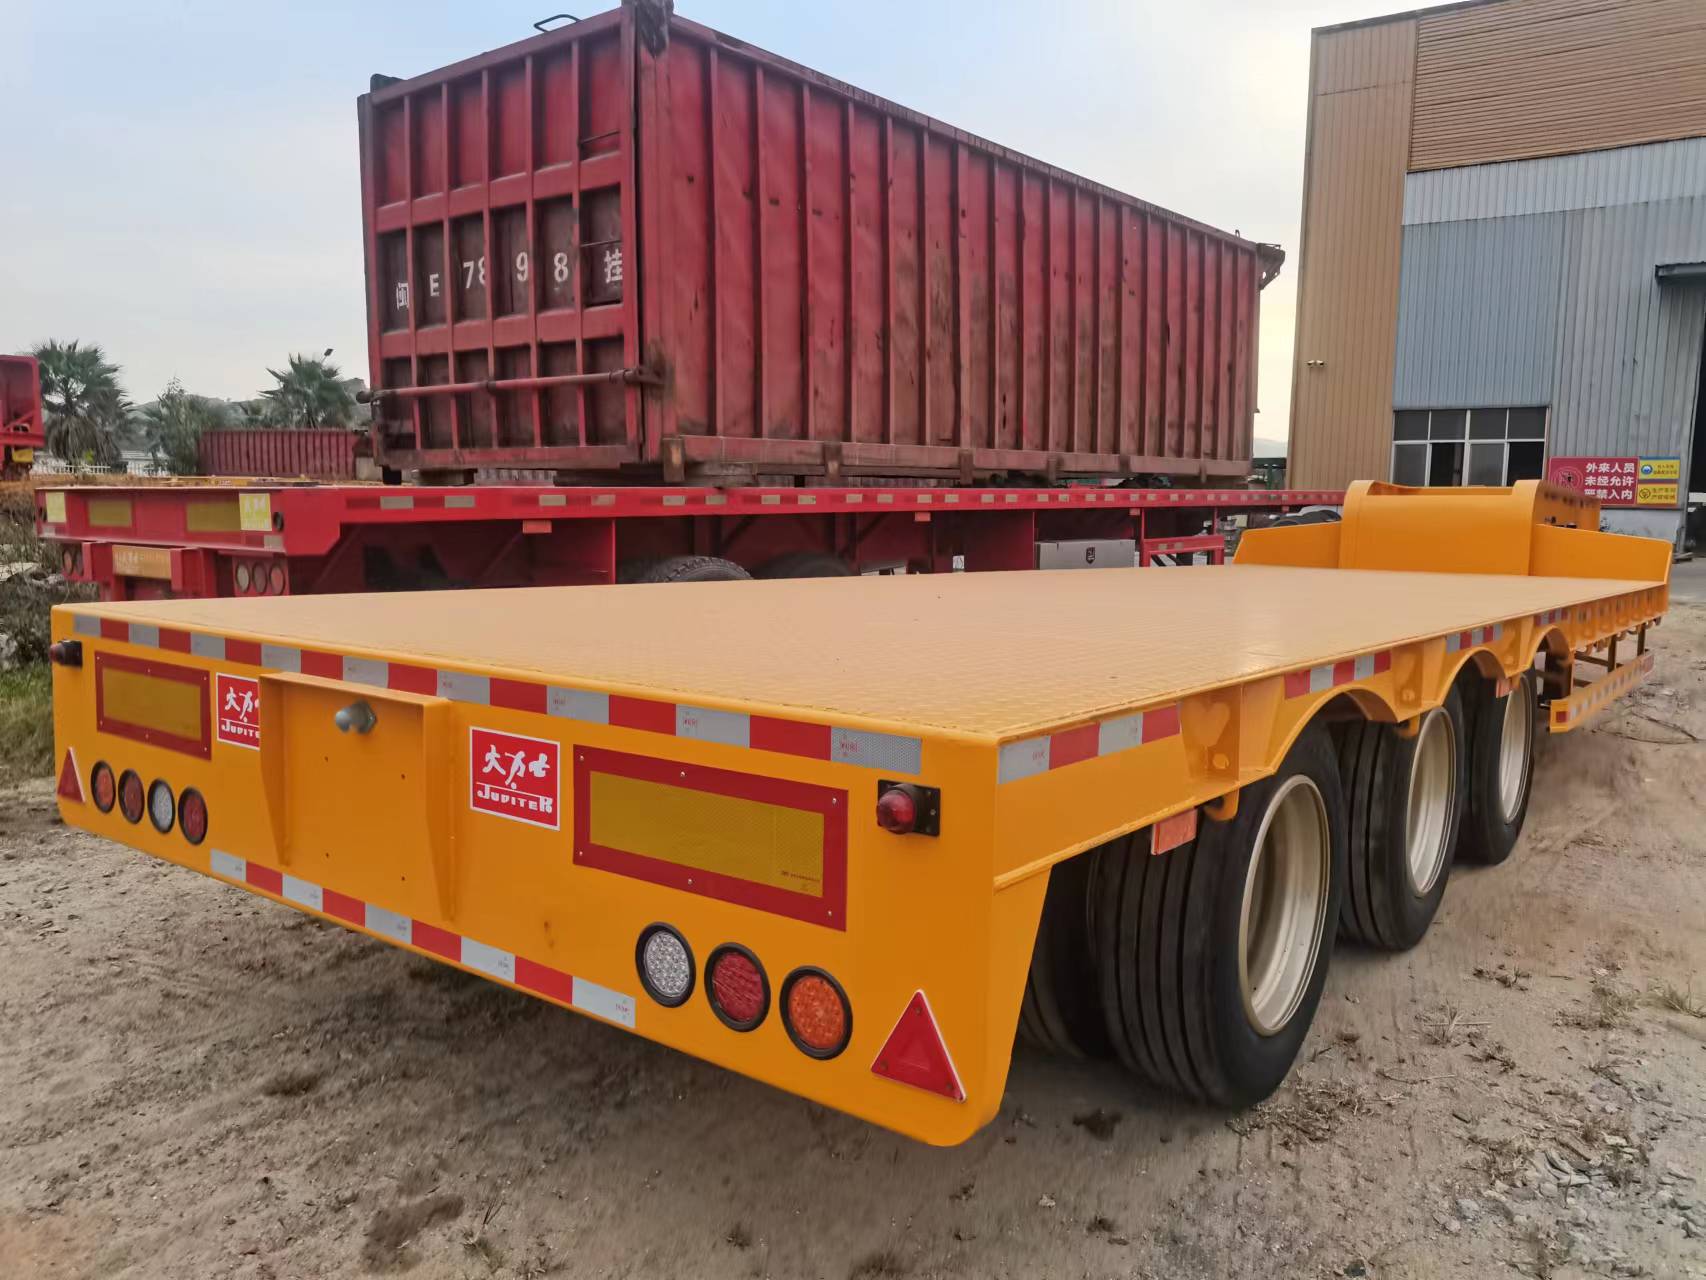 tri-axle lobbed lowboy low loader semi trailer is finished and ready for delivery